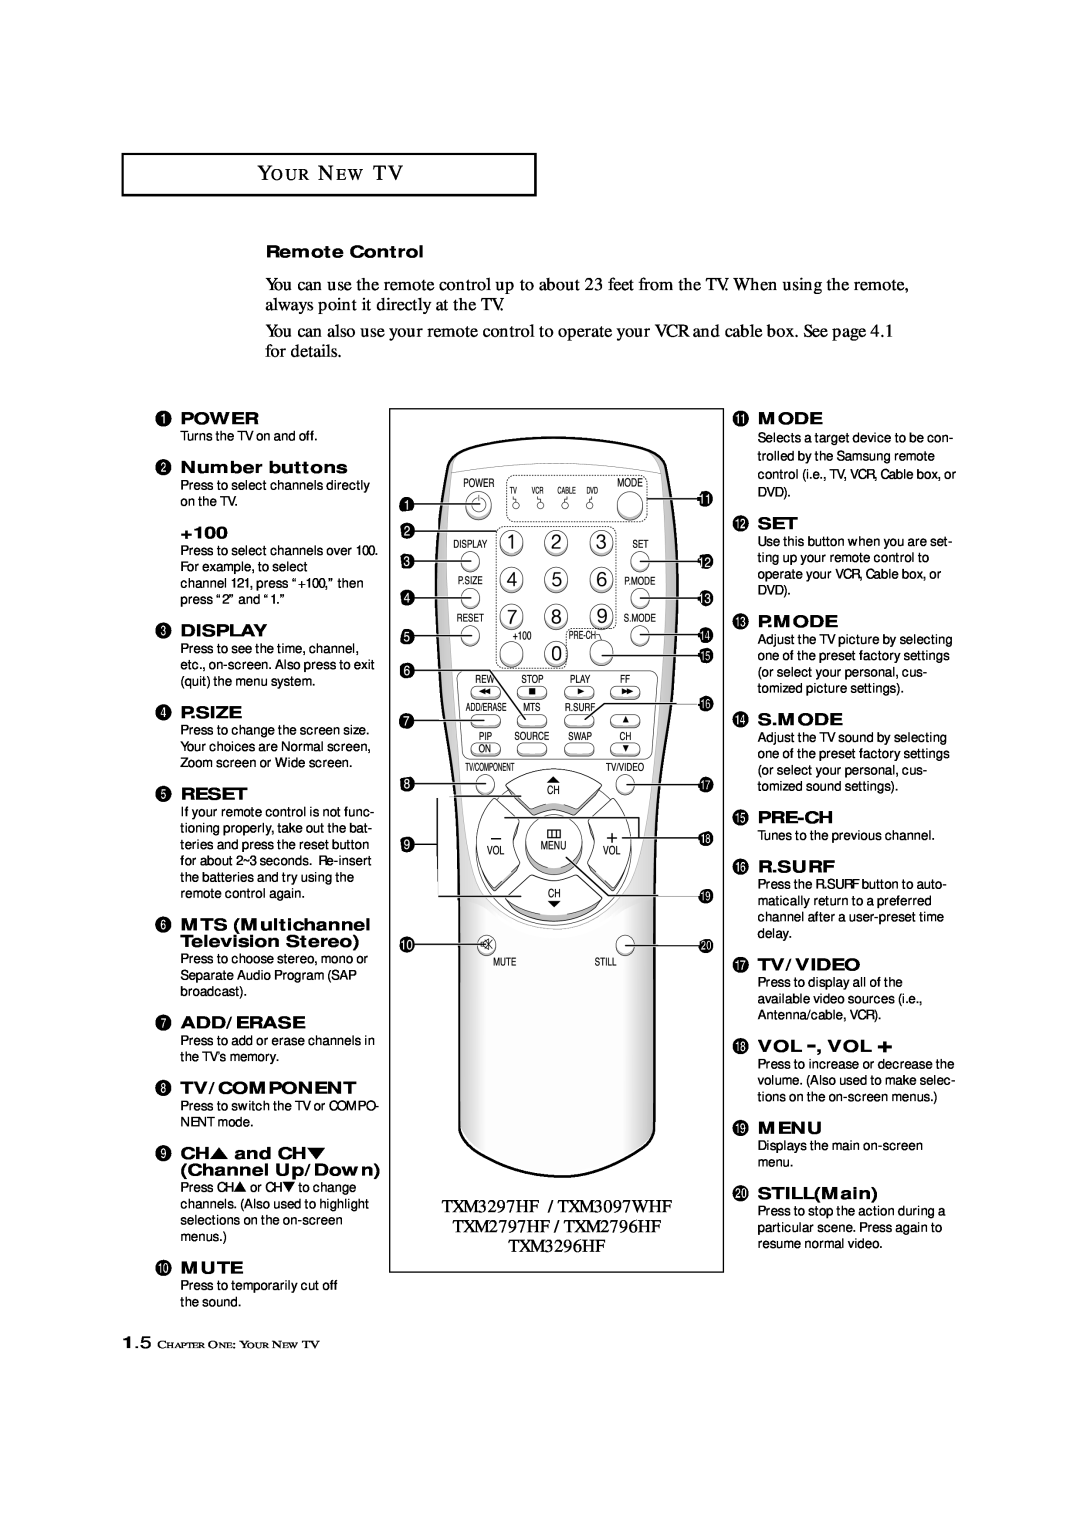 Samsung TXM 2797HF Remote Control, Œ Power, ´ Number buttons, +100, ˇ Display, ¨ P.Size, ˆ Reset, ∏ Add/Erase, ˝ Mute 